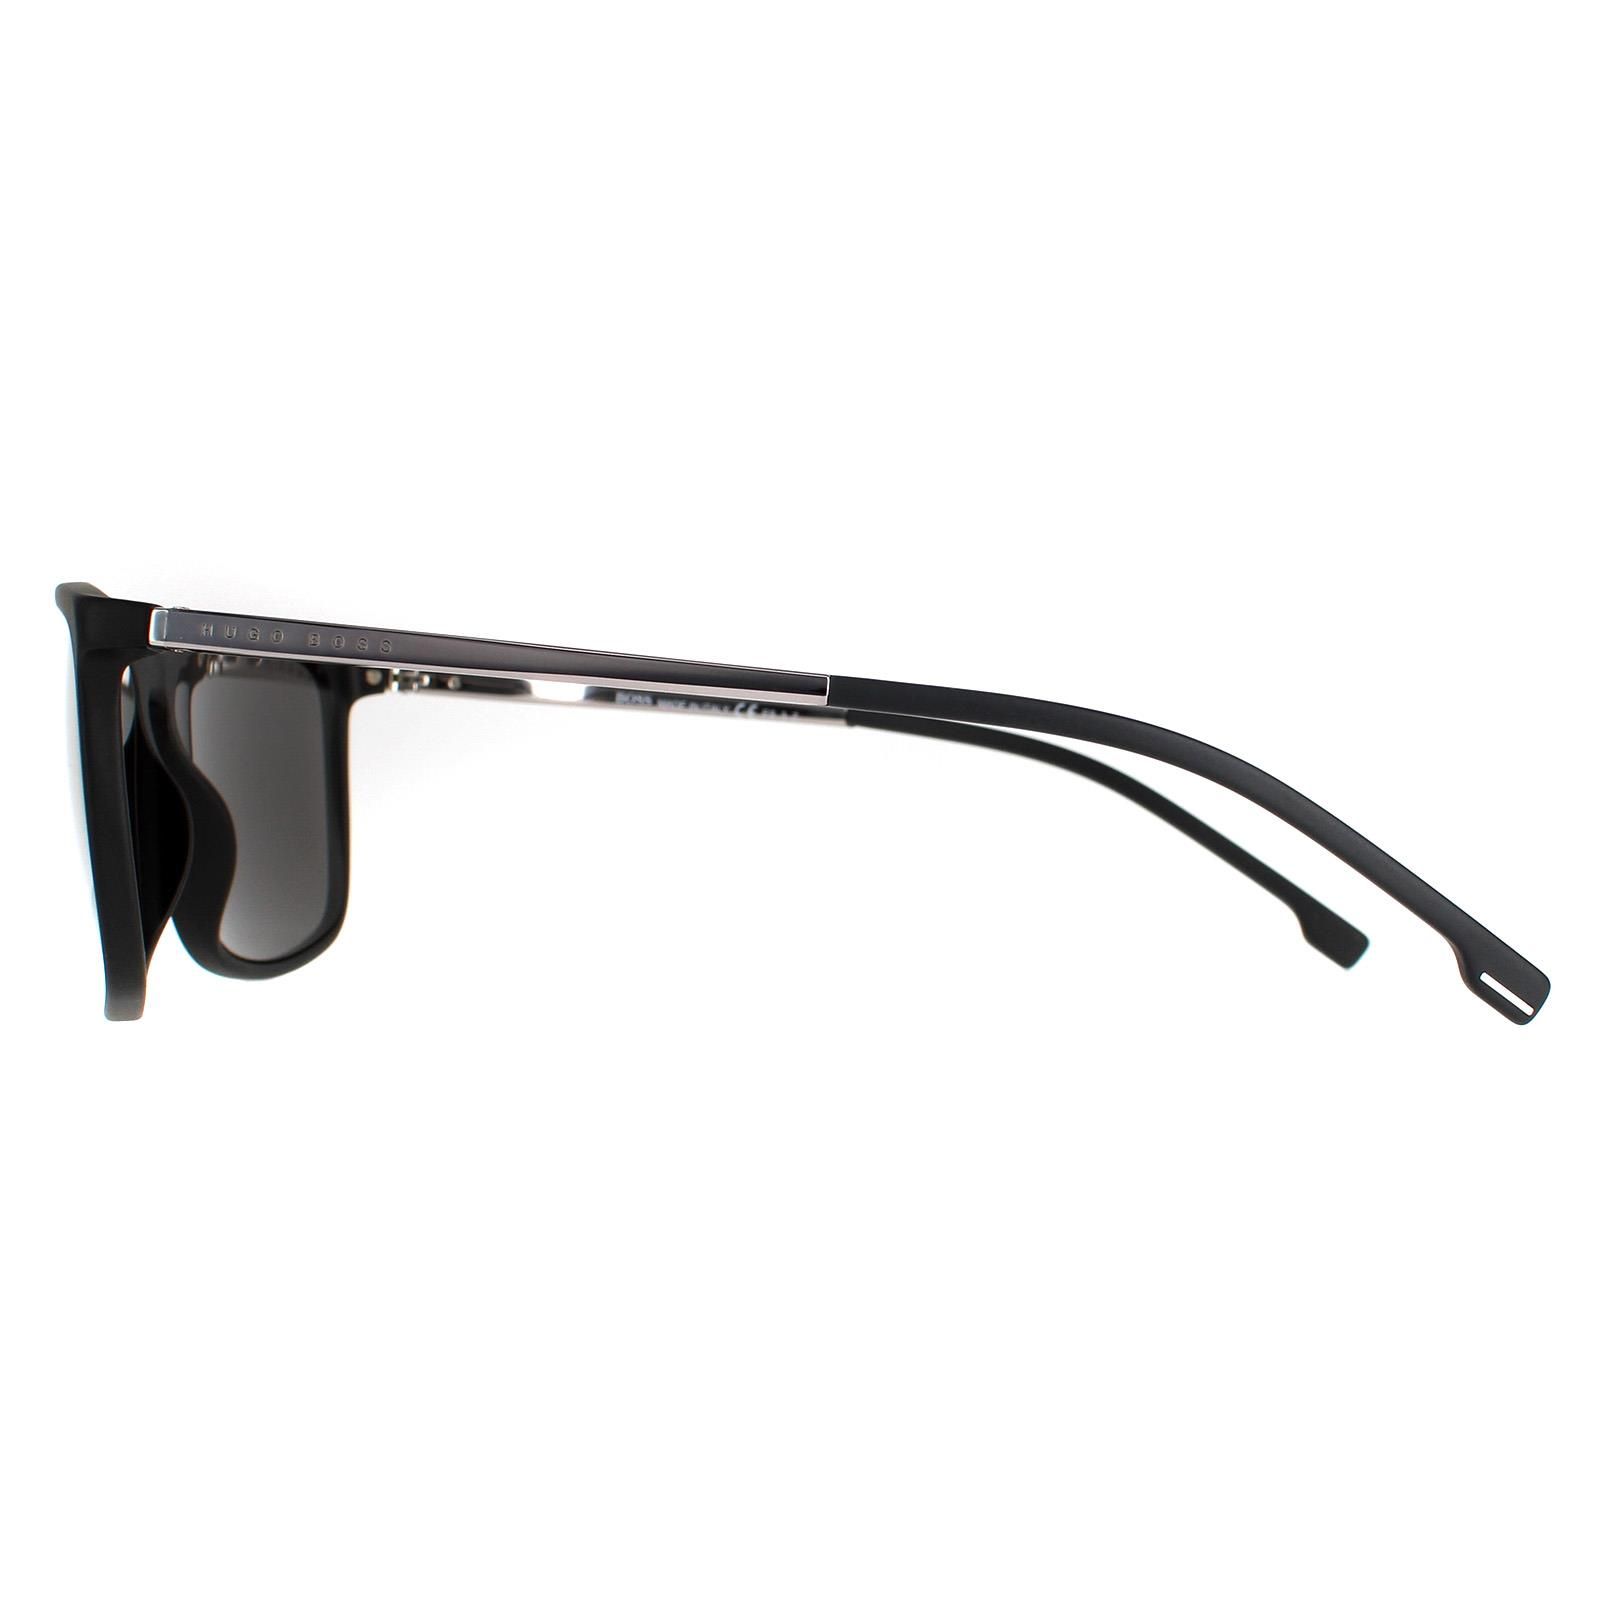 Hugo Boss Rectangle Mens Matte Black Grey Polarized BOSS 1182/S/IT  Hugo Boss are a masculine design with a super slim rectangular frame. Crafted in Italy from lightweight plastic they're comfortable and durable with the Hugo Boss logo etched into the slender temples.